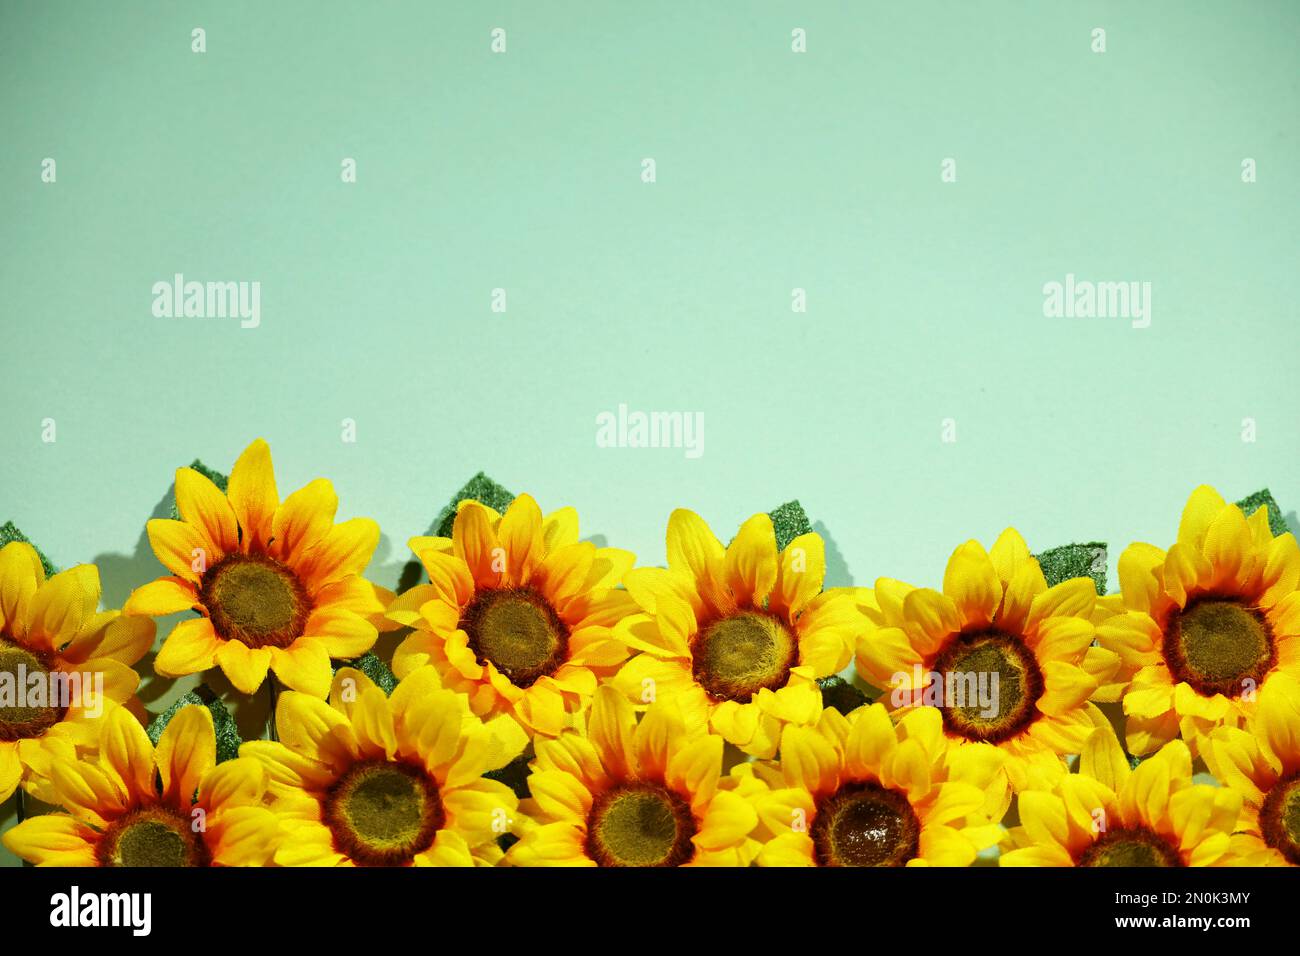 sunflower artificial flower background material picture in blue space Stock Photo